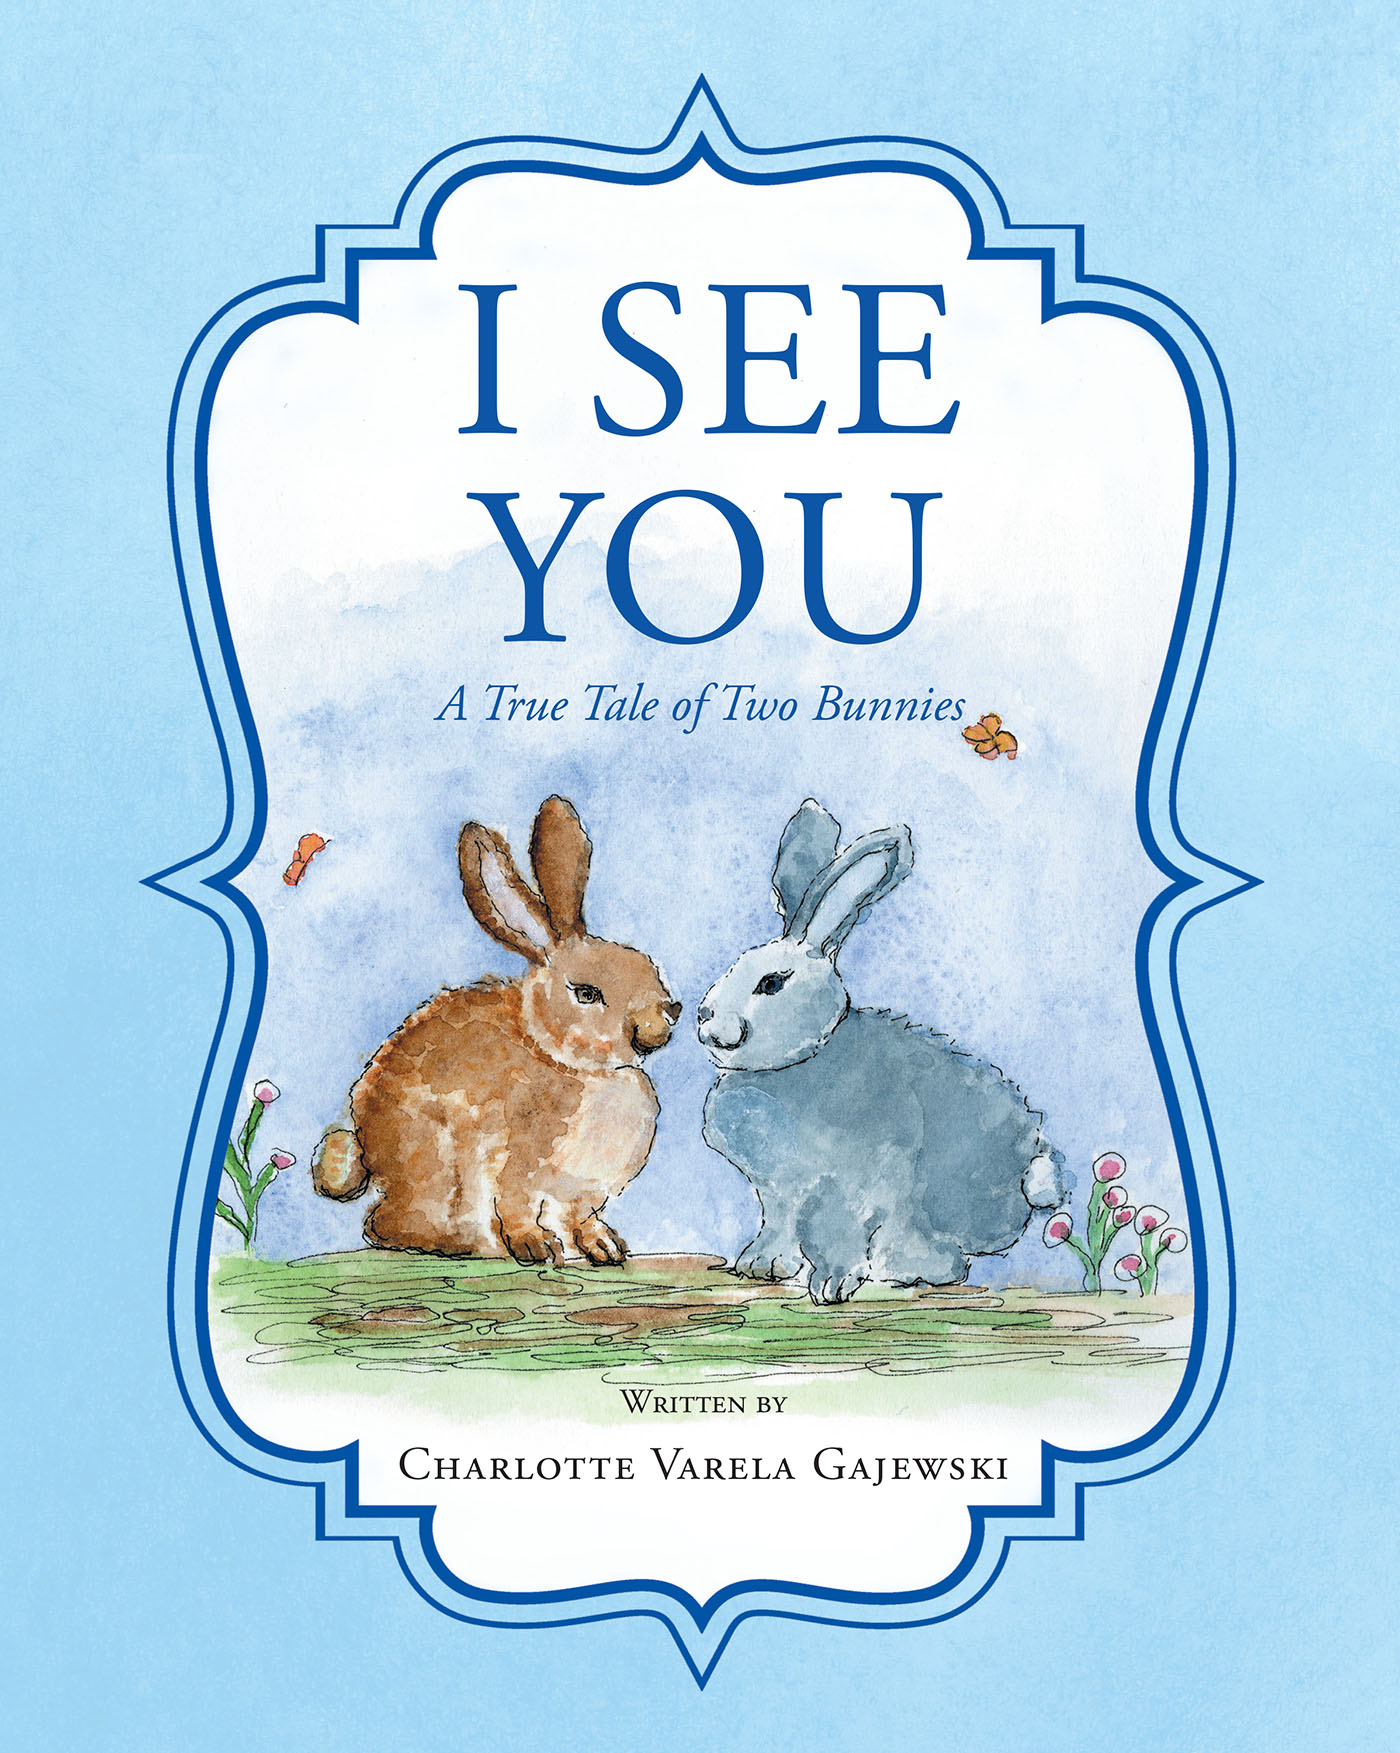 Charlotte Varela Gajewski’s New Book, “I See You: A True Tale of Two Bunnies,” is a Delightful and Colorful Children’s Tale About a Blossoming Friendship Between Bunnies